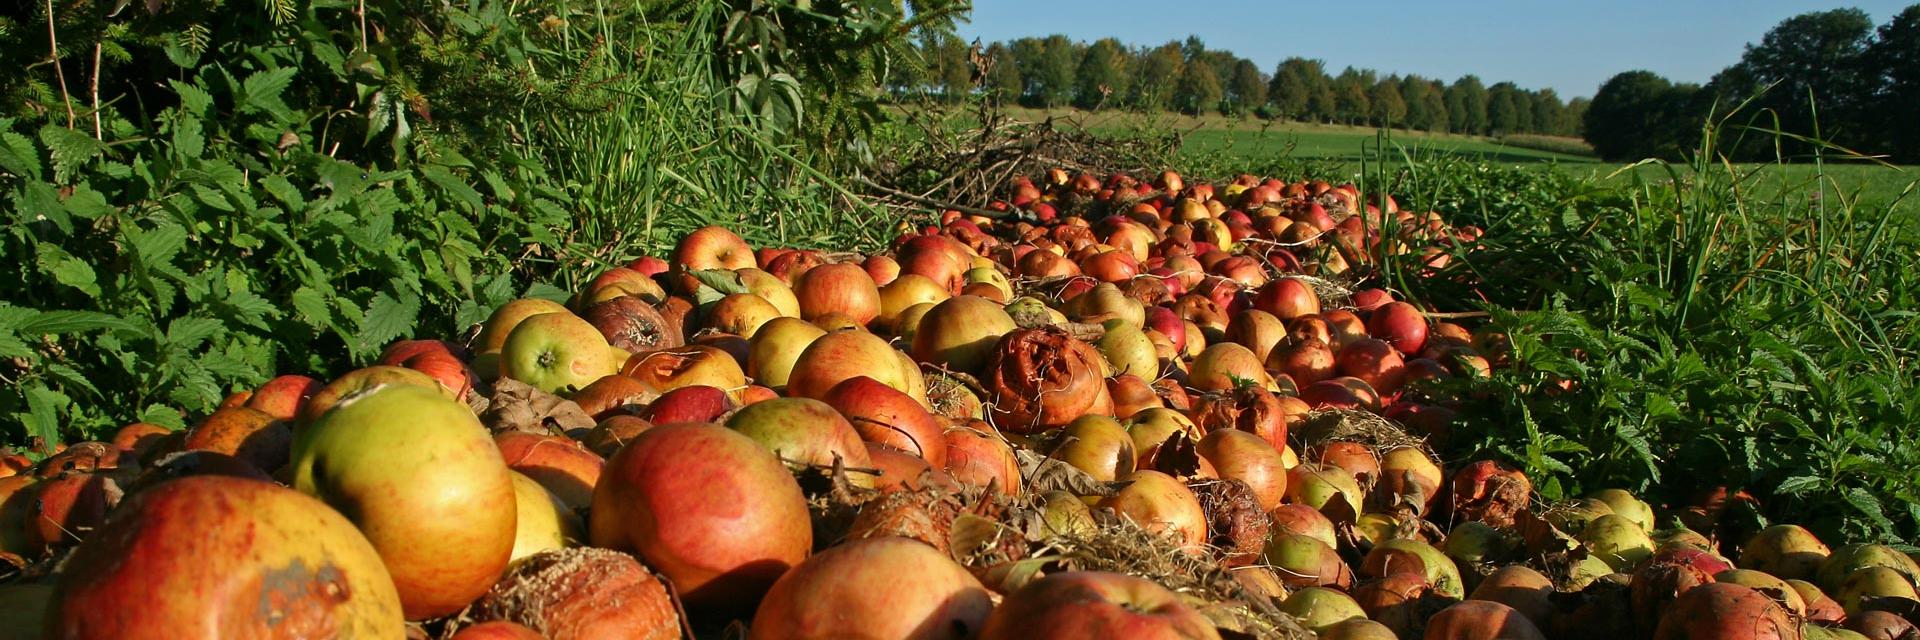 A large row of apples rotting in a field.